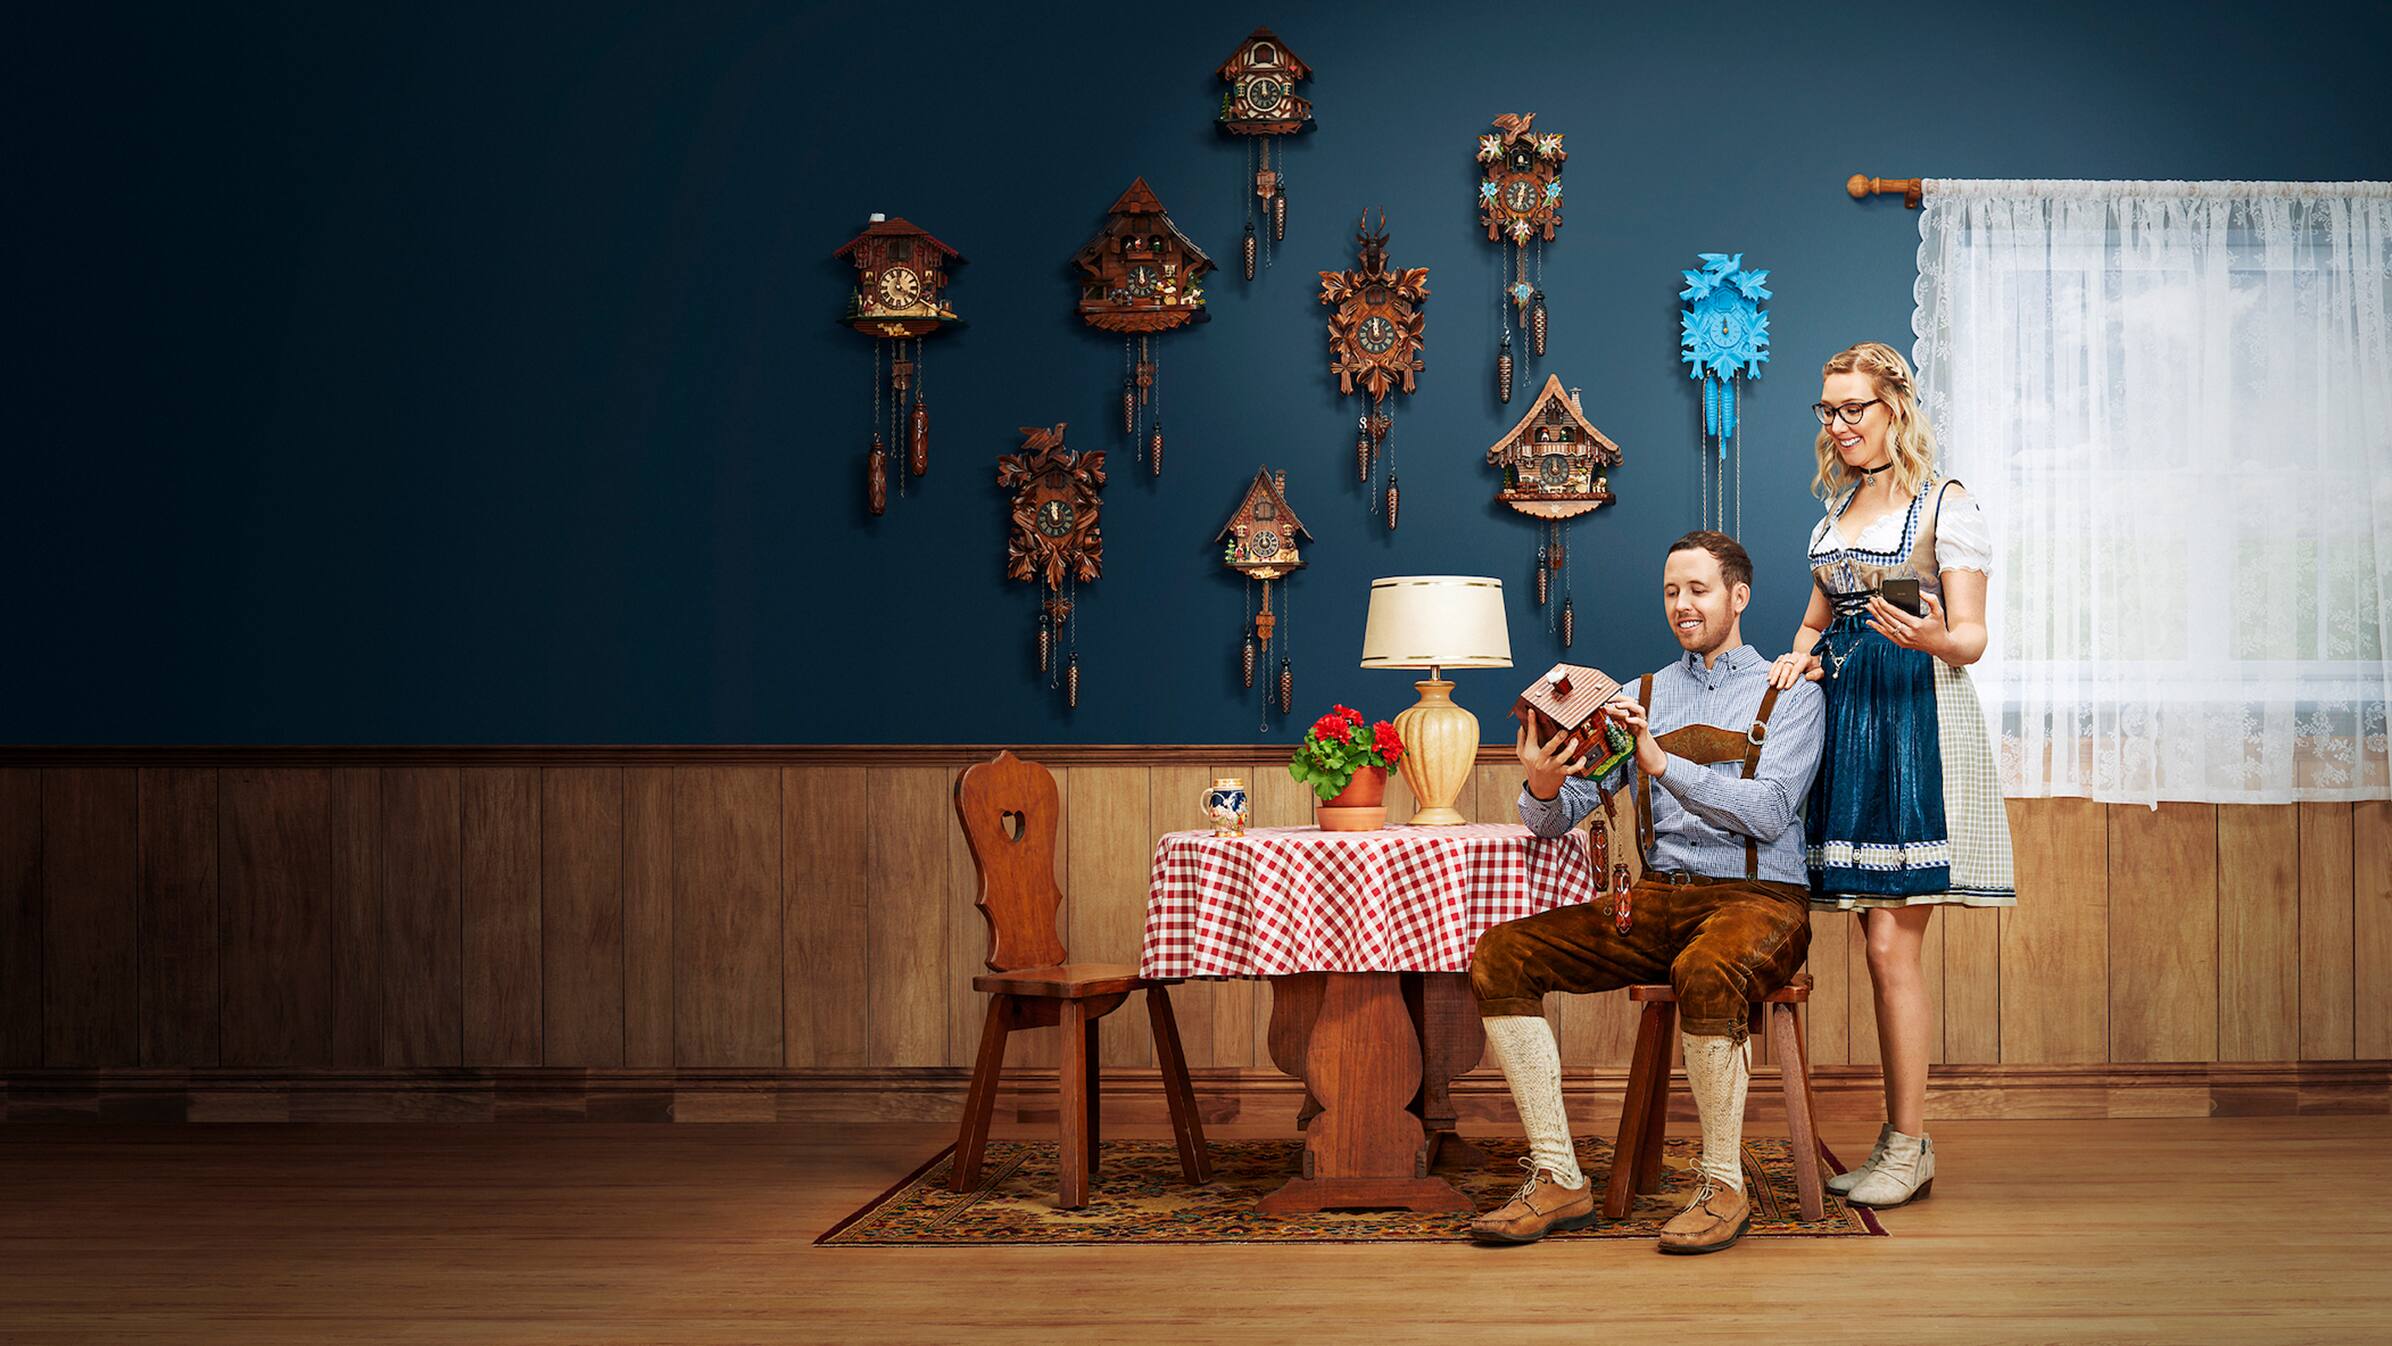 Anton and Stef of German Cuckoo Clock Nest sit at a table holding a cuckoo clock with a wall of clocks behind them.